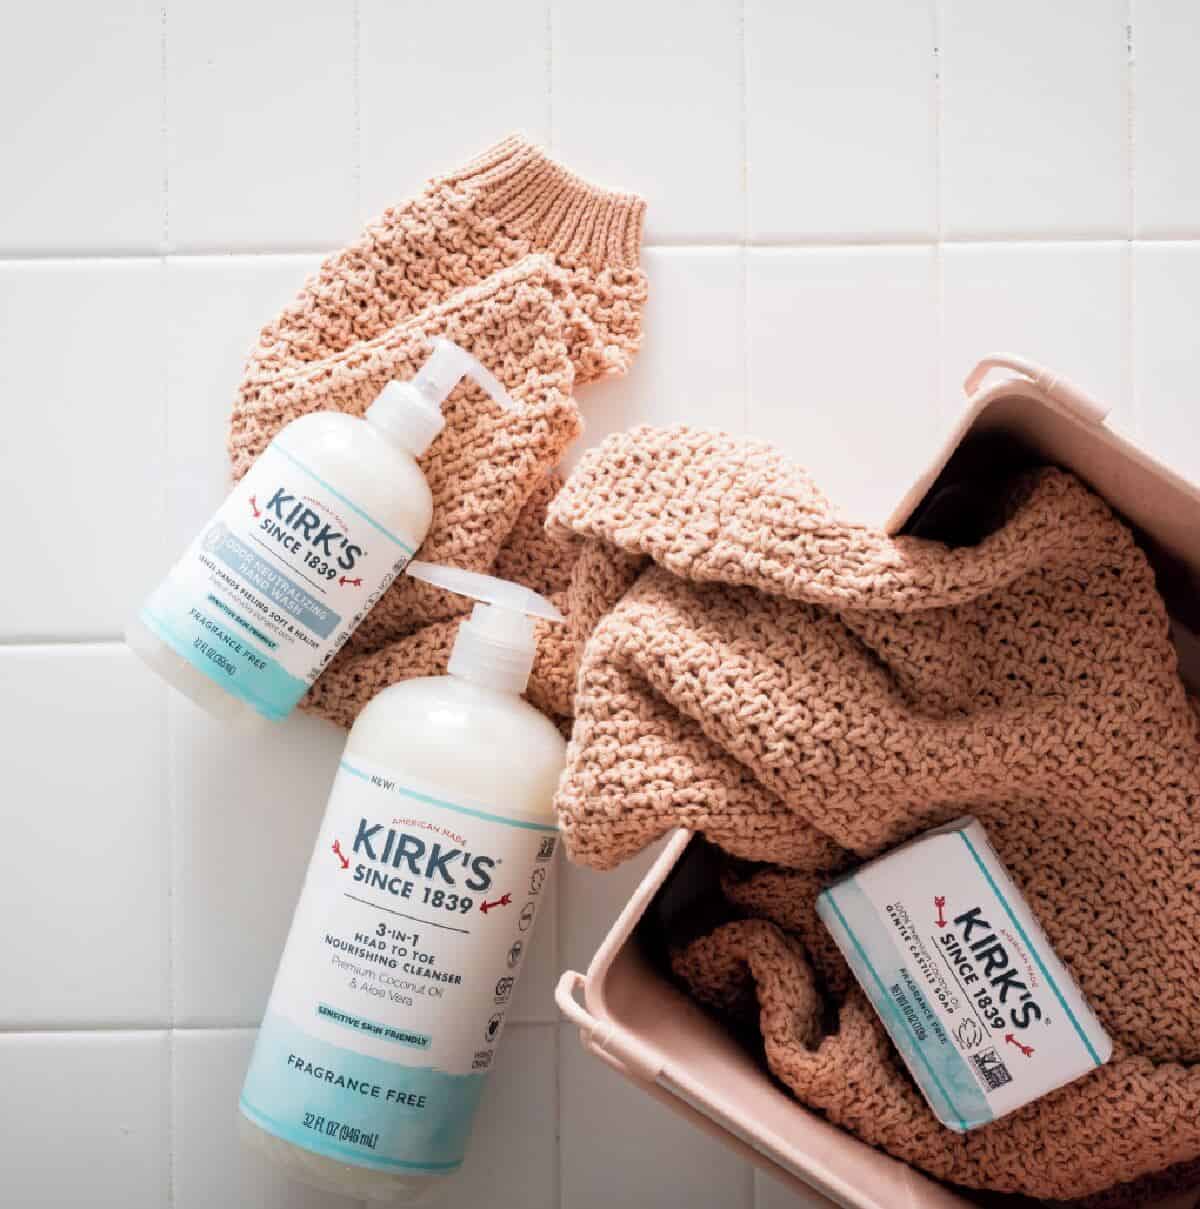 Two Kirk's pump fragrance-free pump bottles and one bar of soap laying on a hand knit light brown sweater on a white tile background.